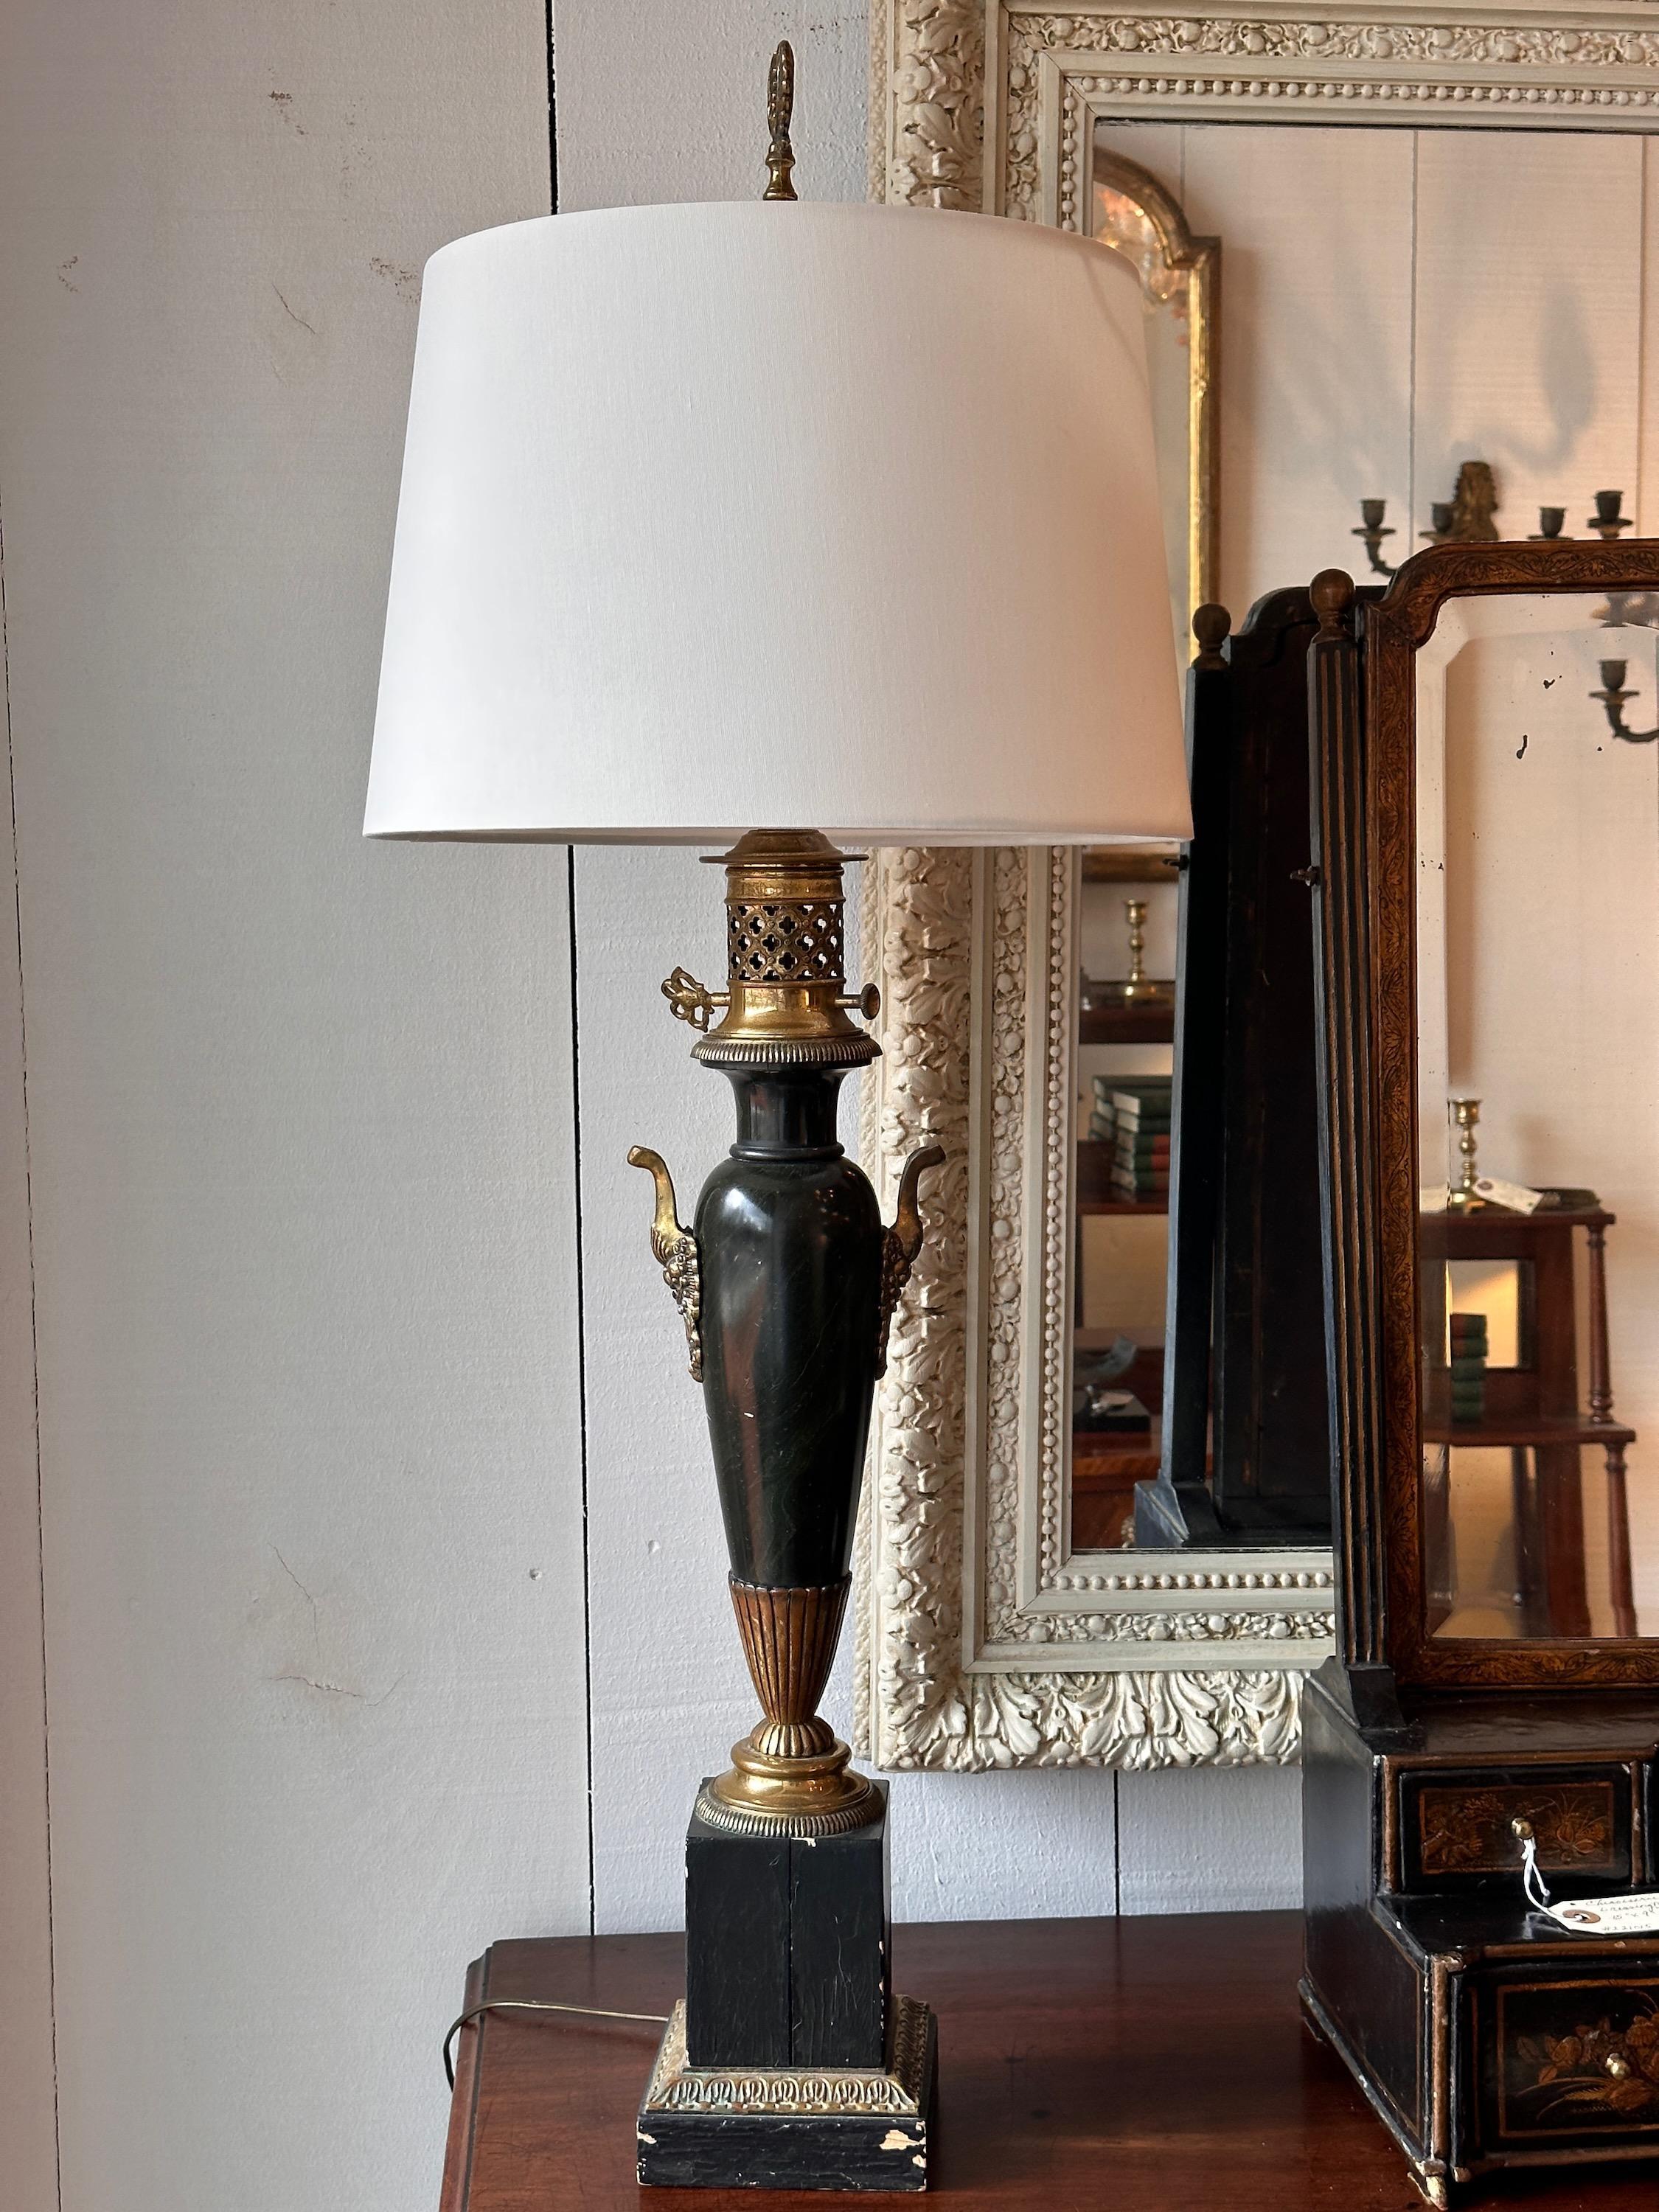 Single lamp, nice elegant lines. Made in the 19th Century.